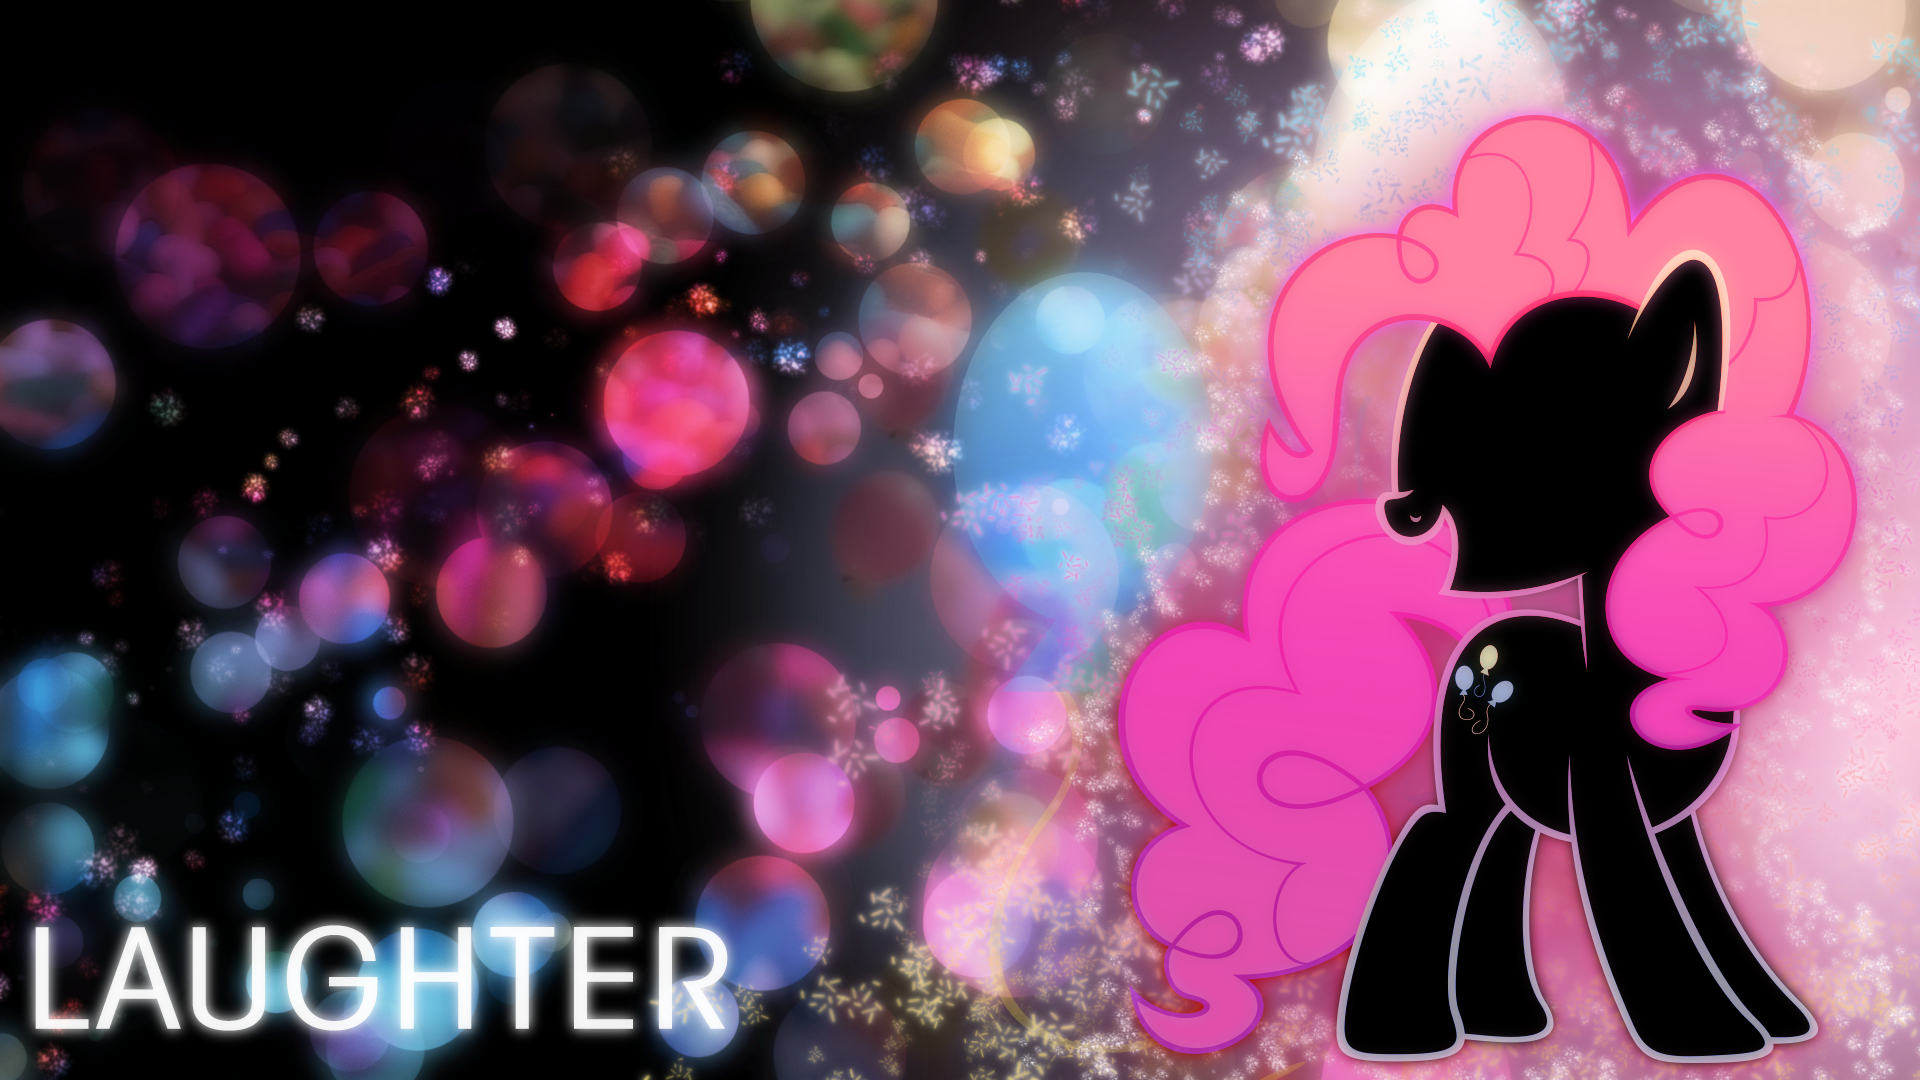 Spectrum of Laughter by KibbieTheGreat and Shho13